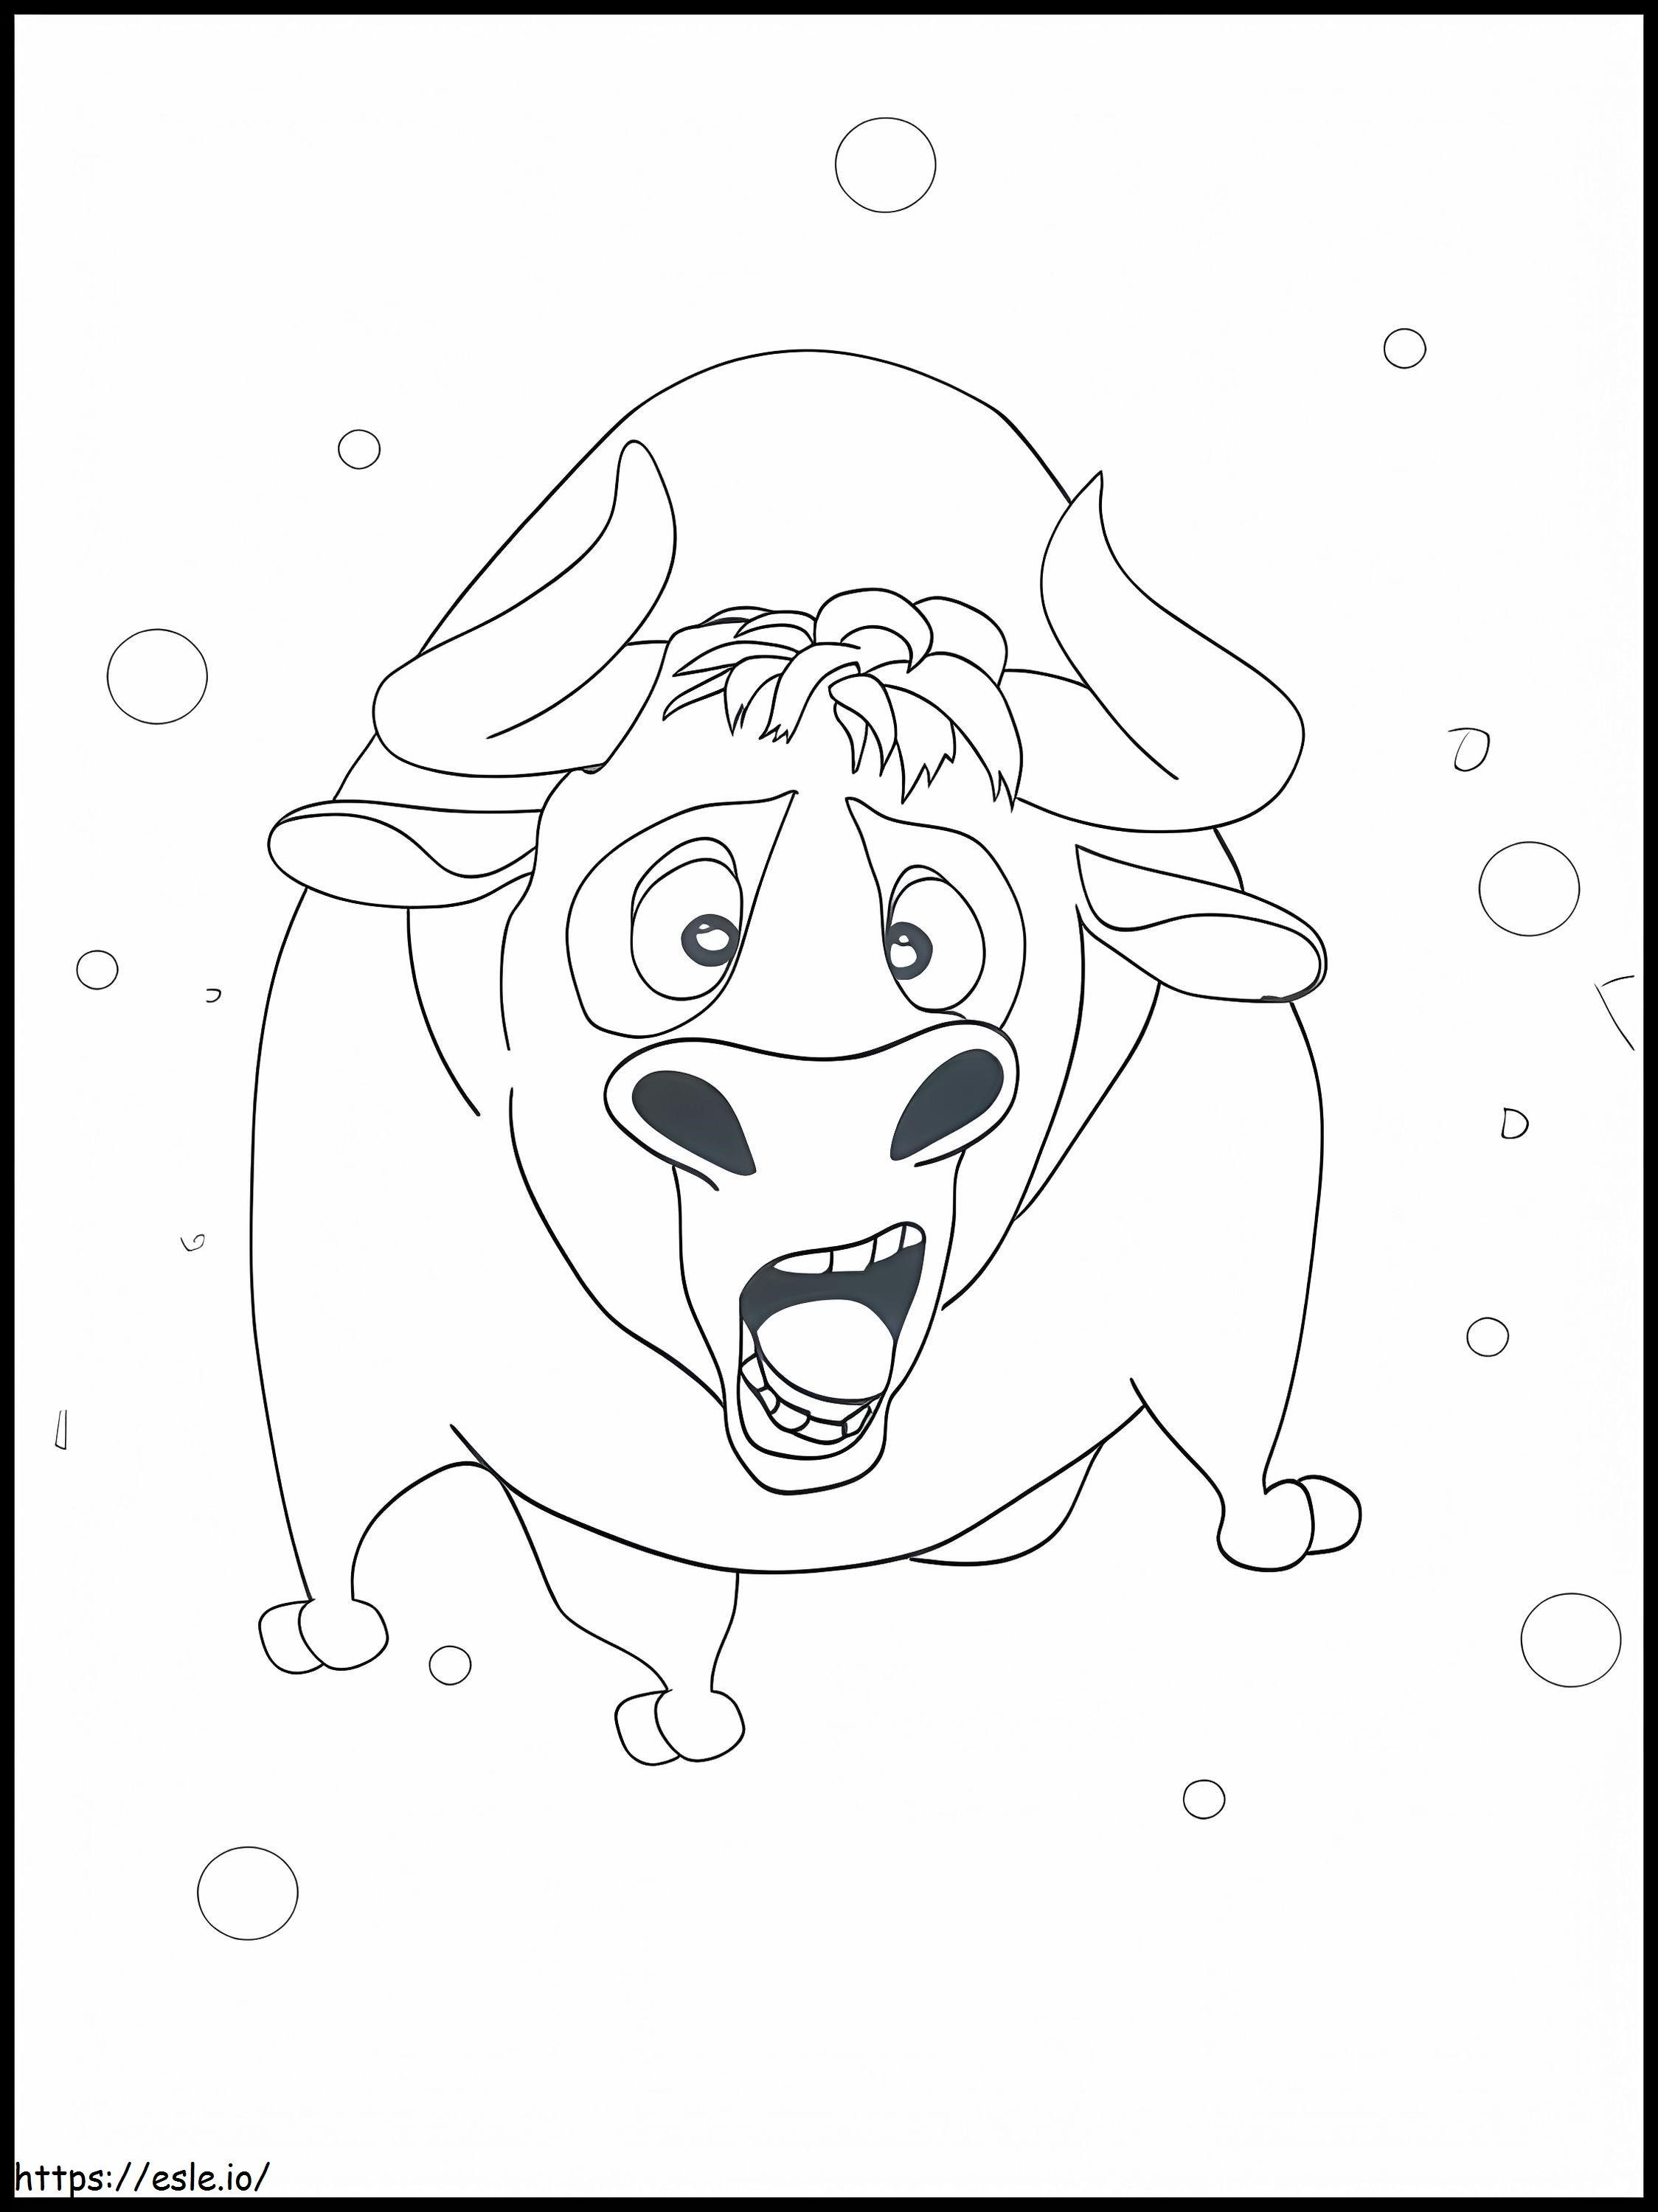 Fernando In Panic coloring page